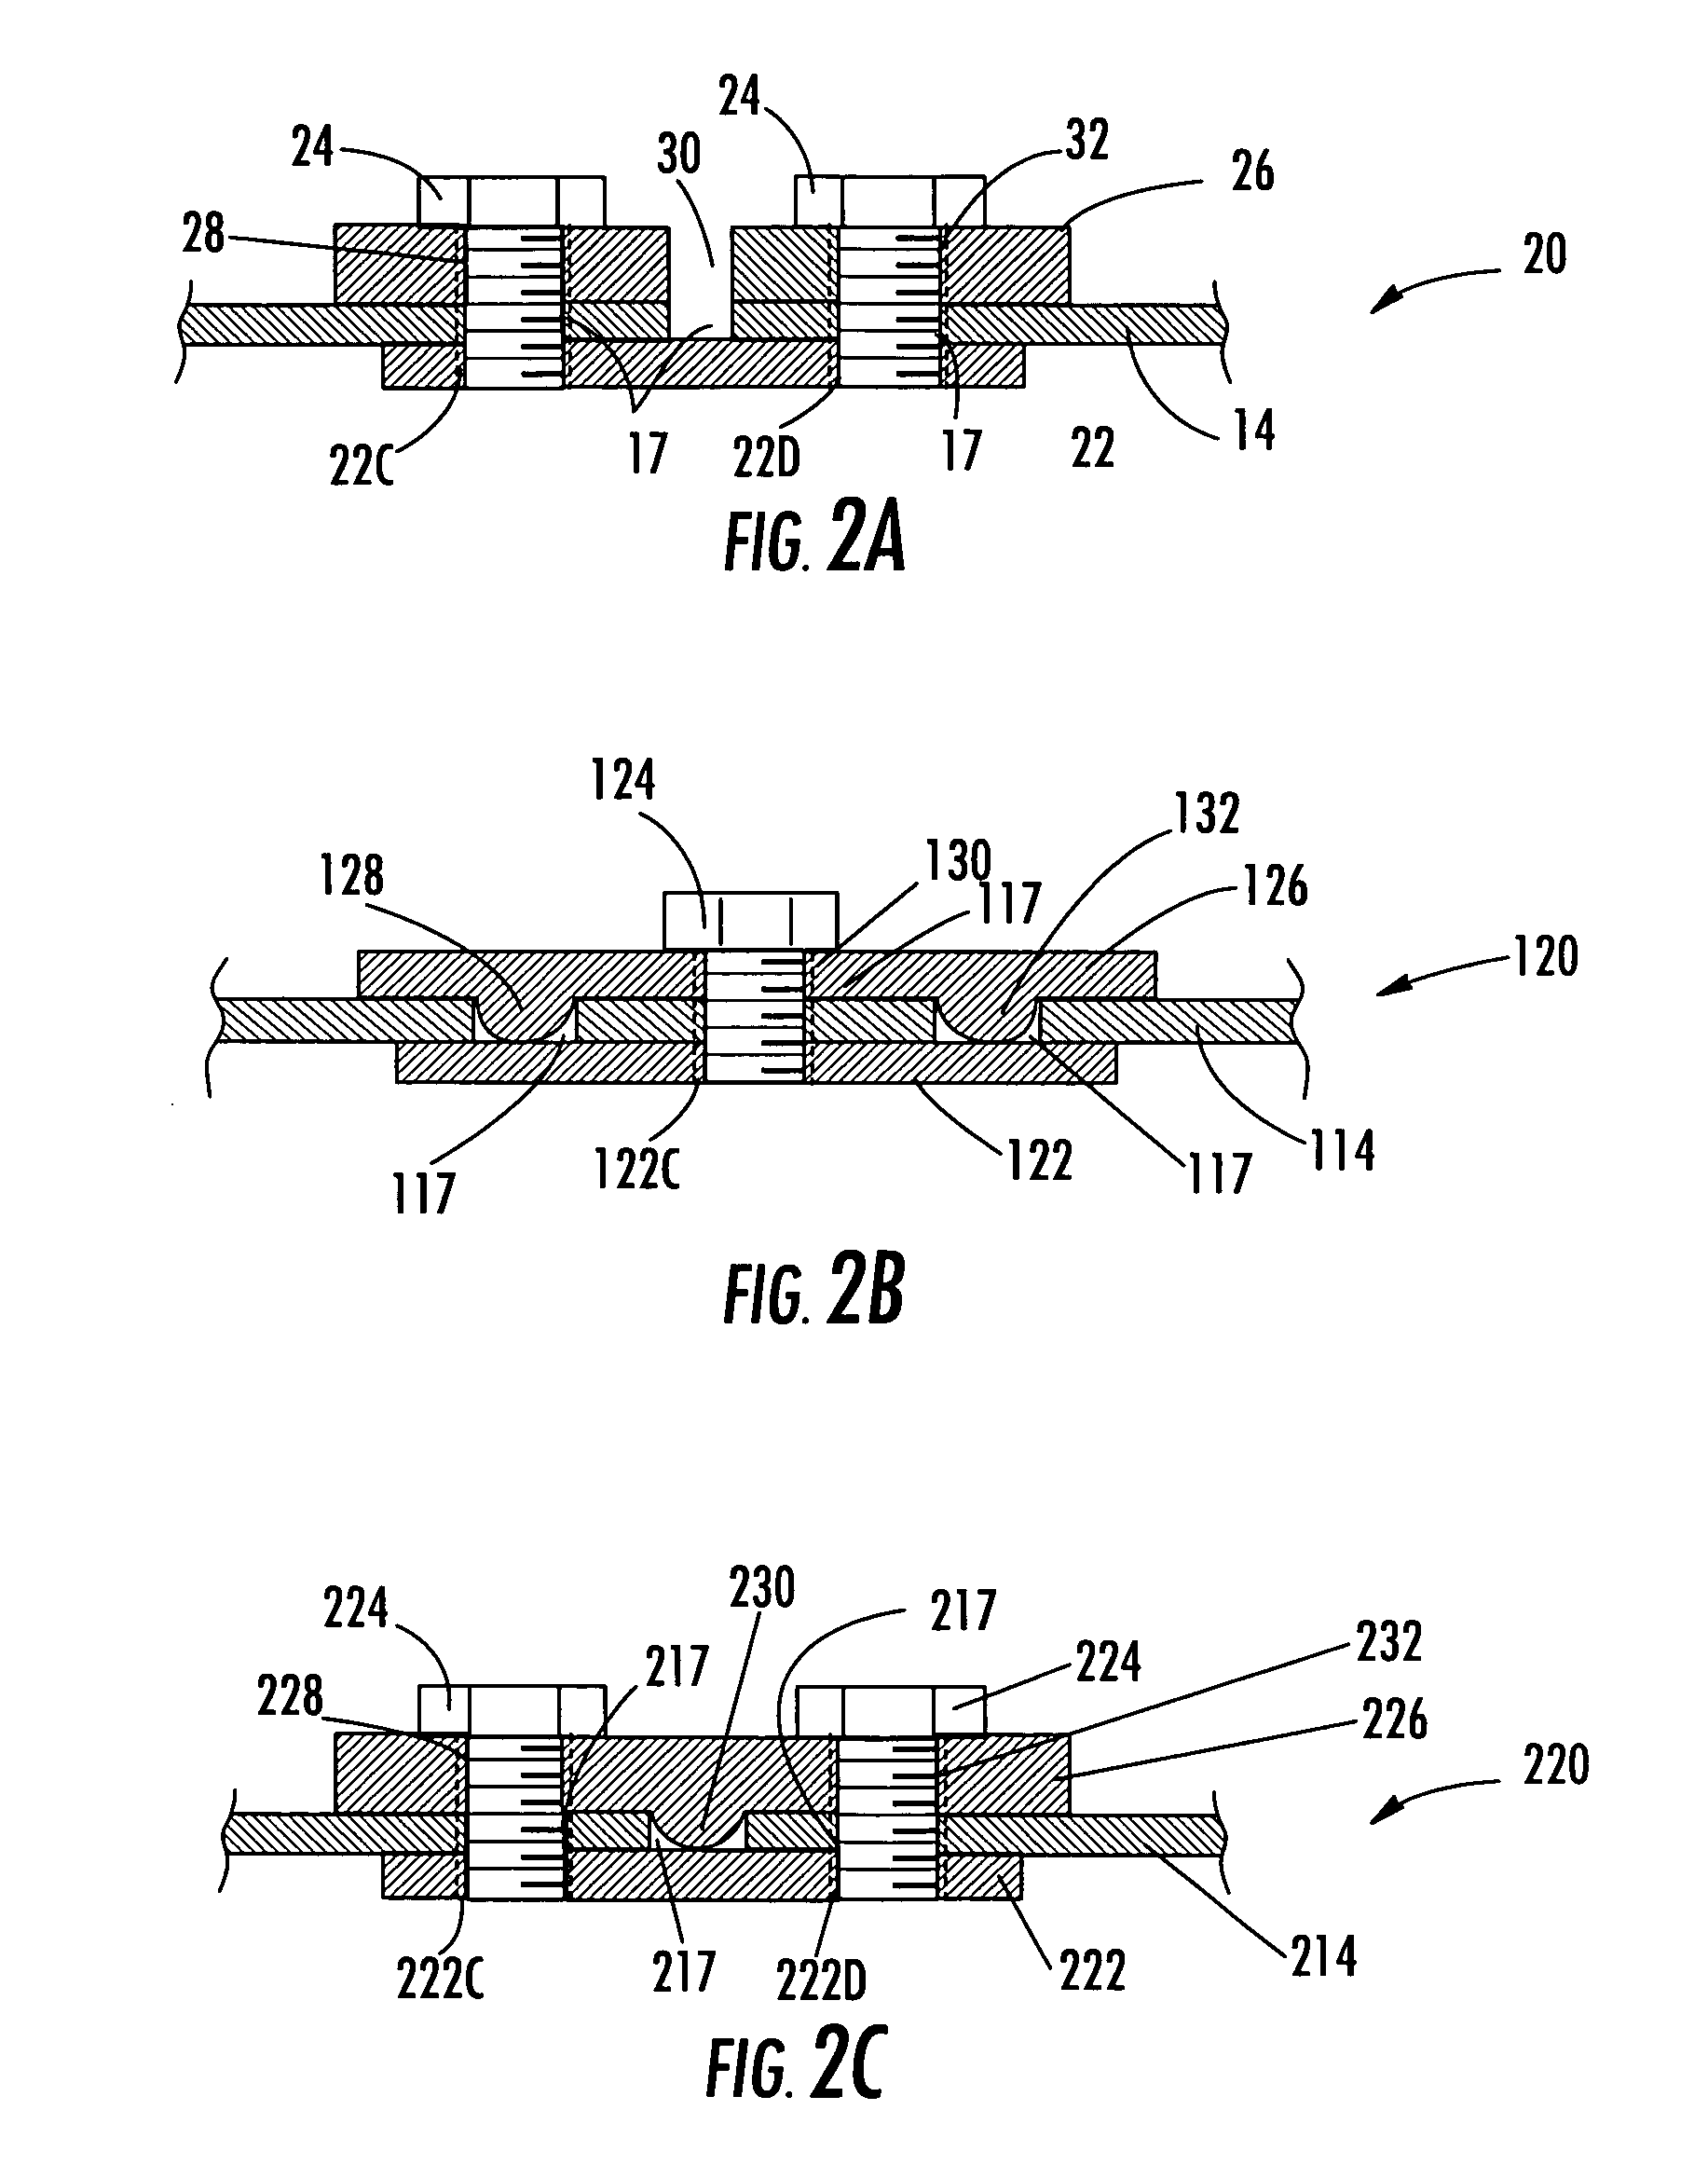 Apparatus for carrying cargo